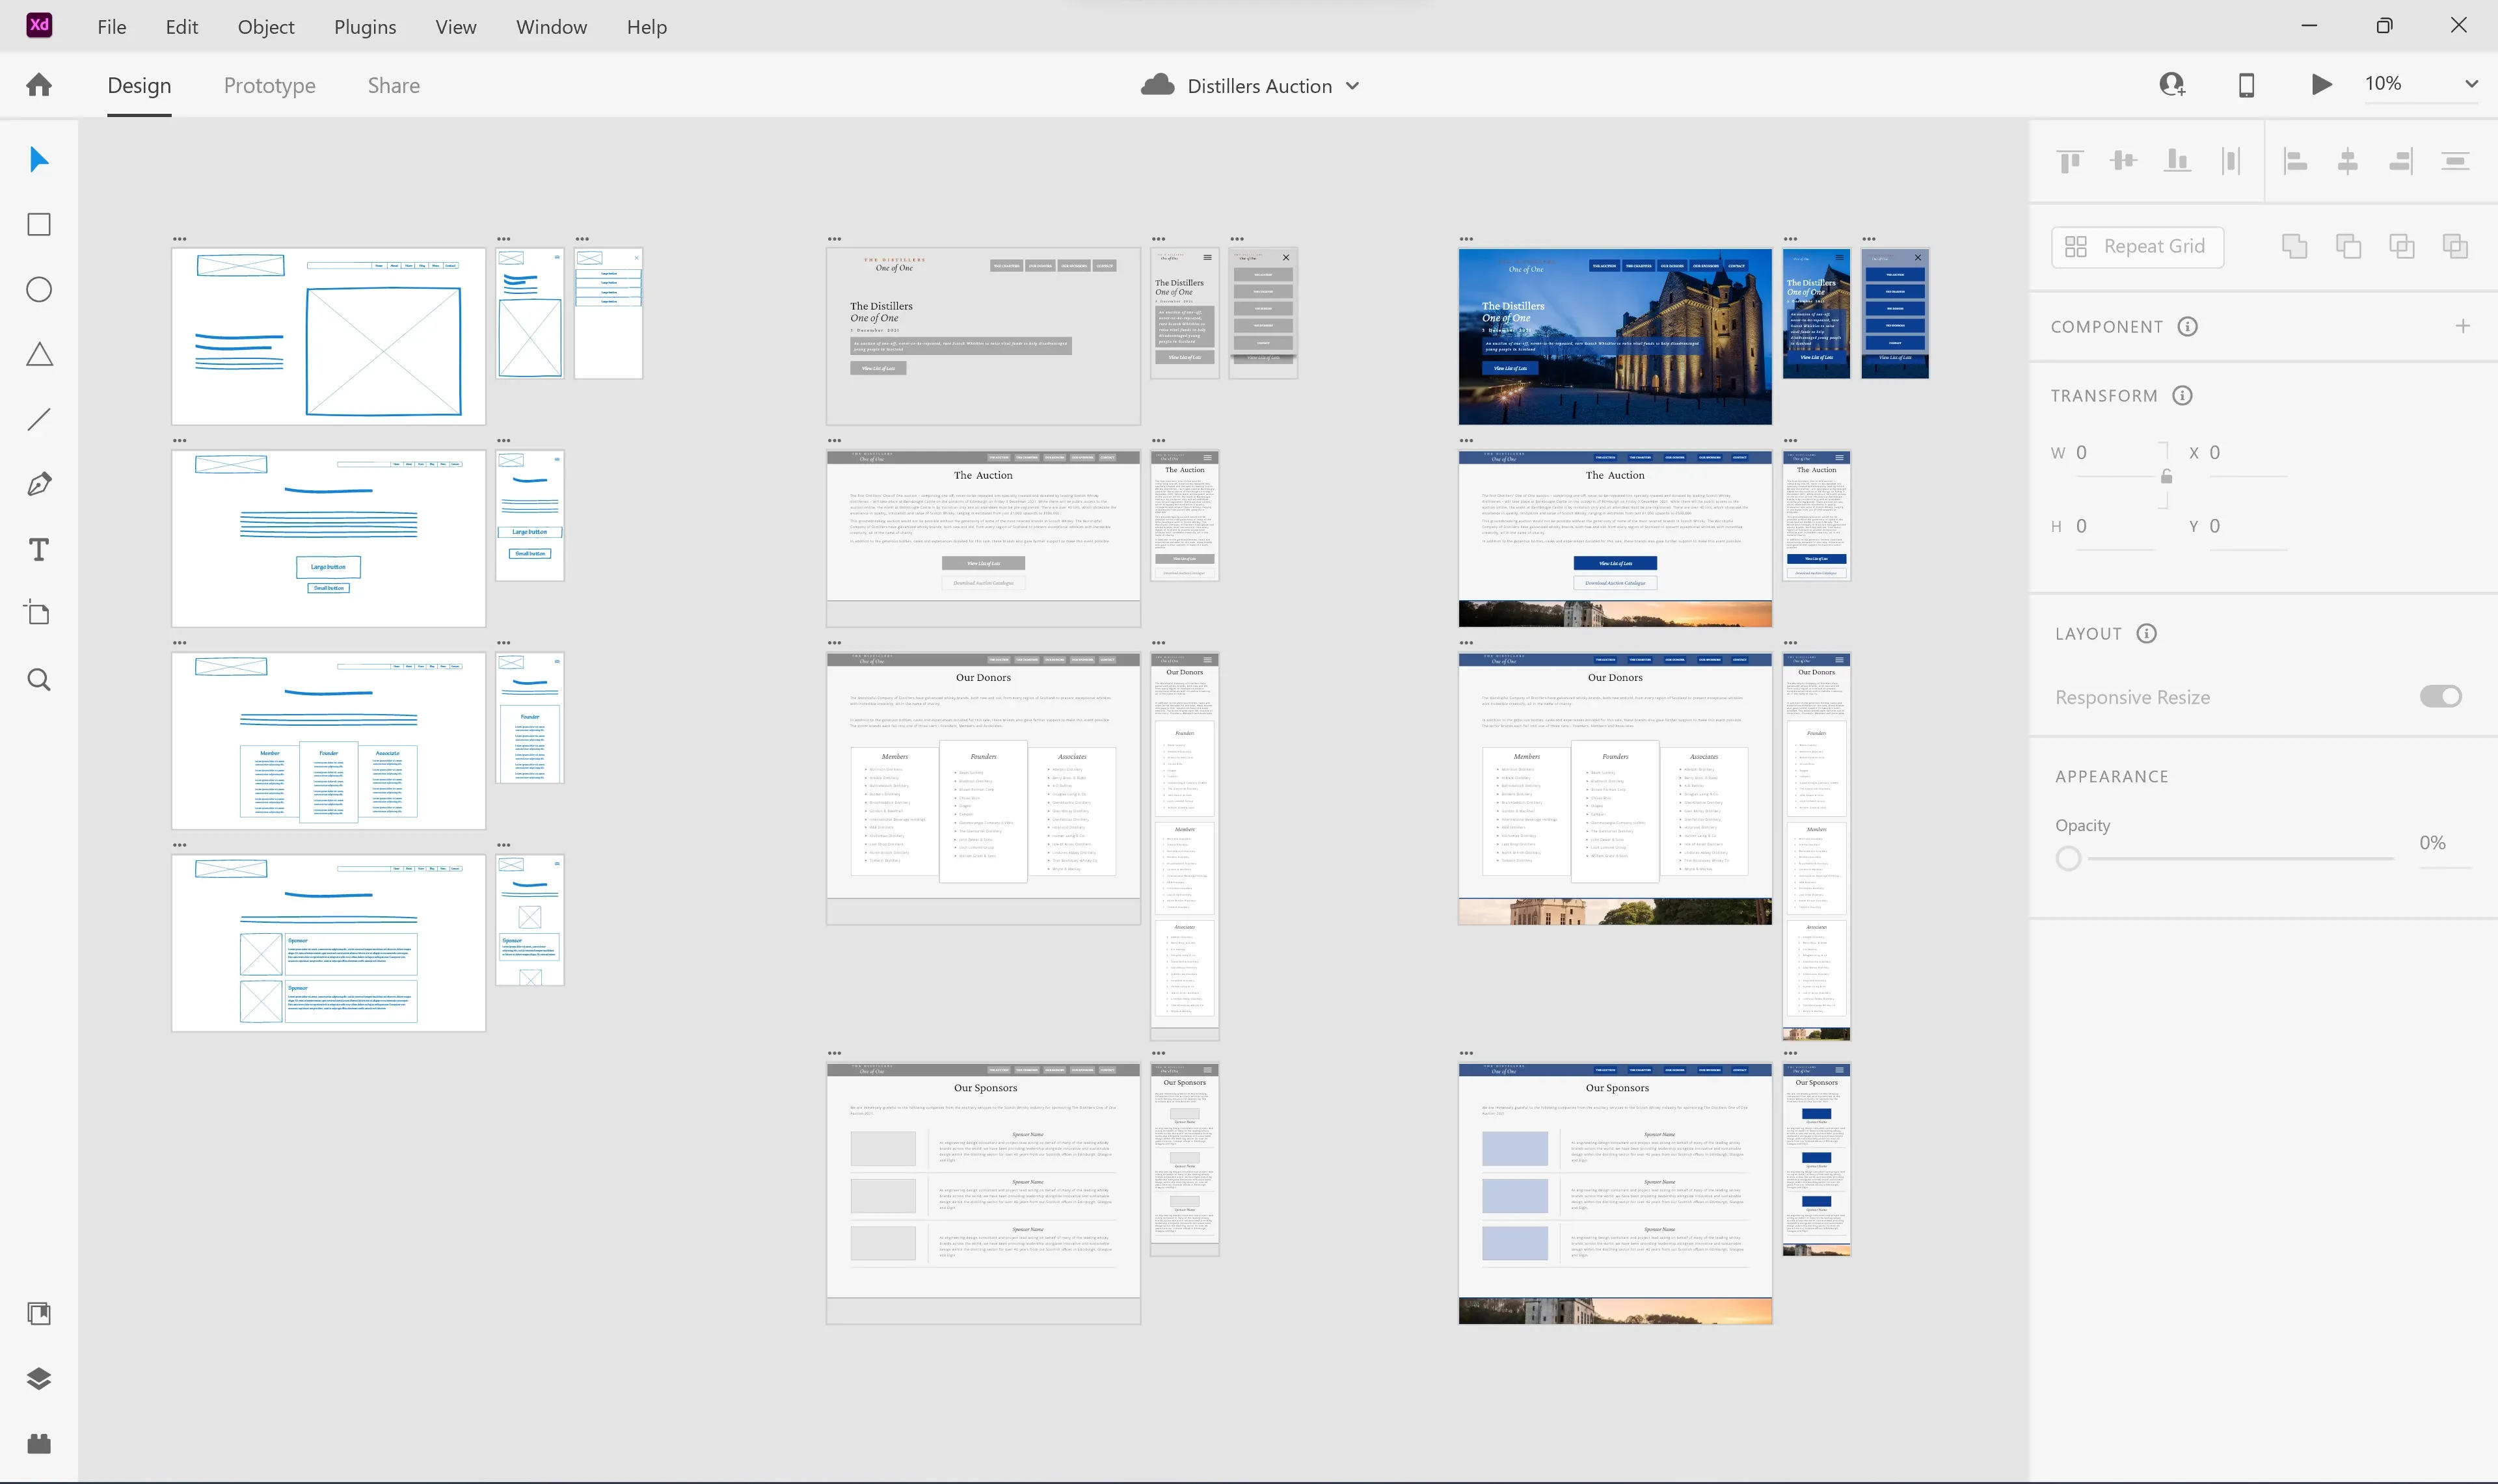 sketch wireframe to high fidelity design for project